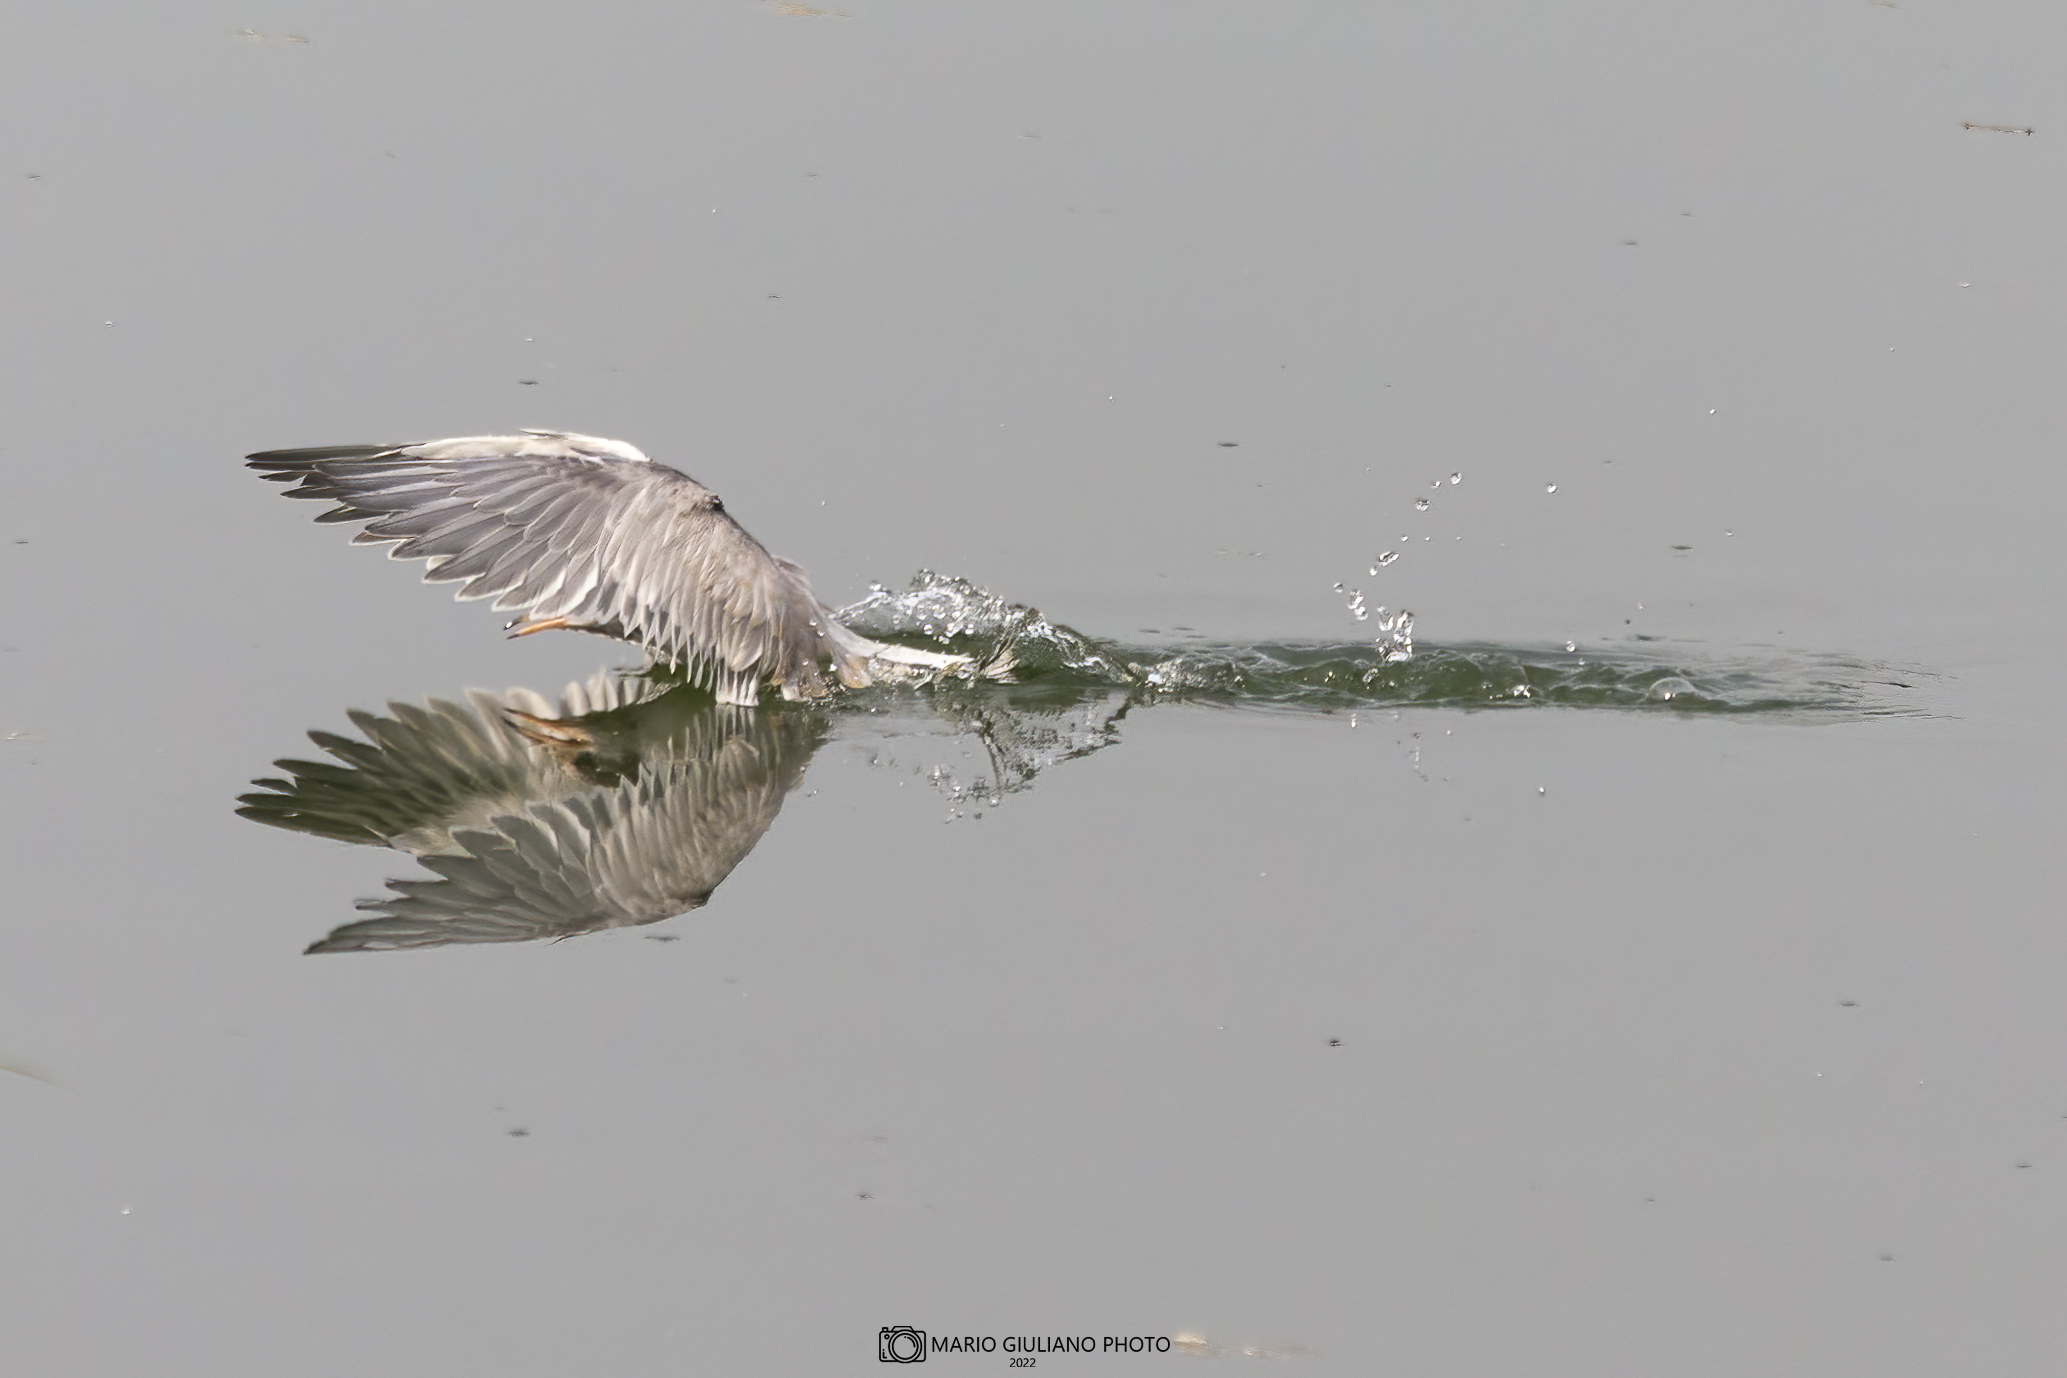 Reflections of a young tern...